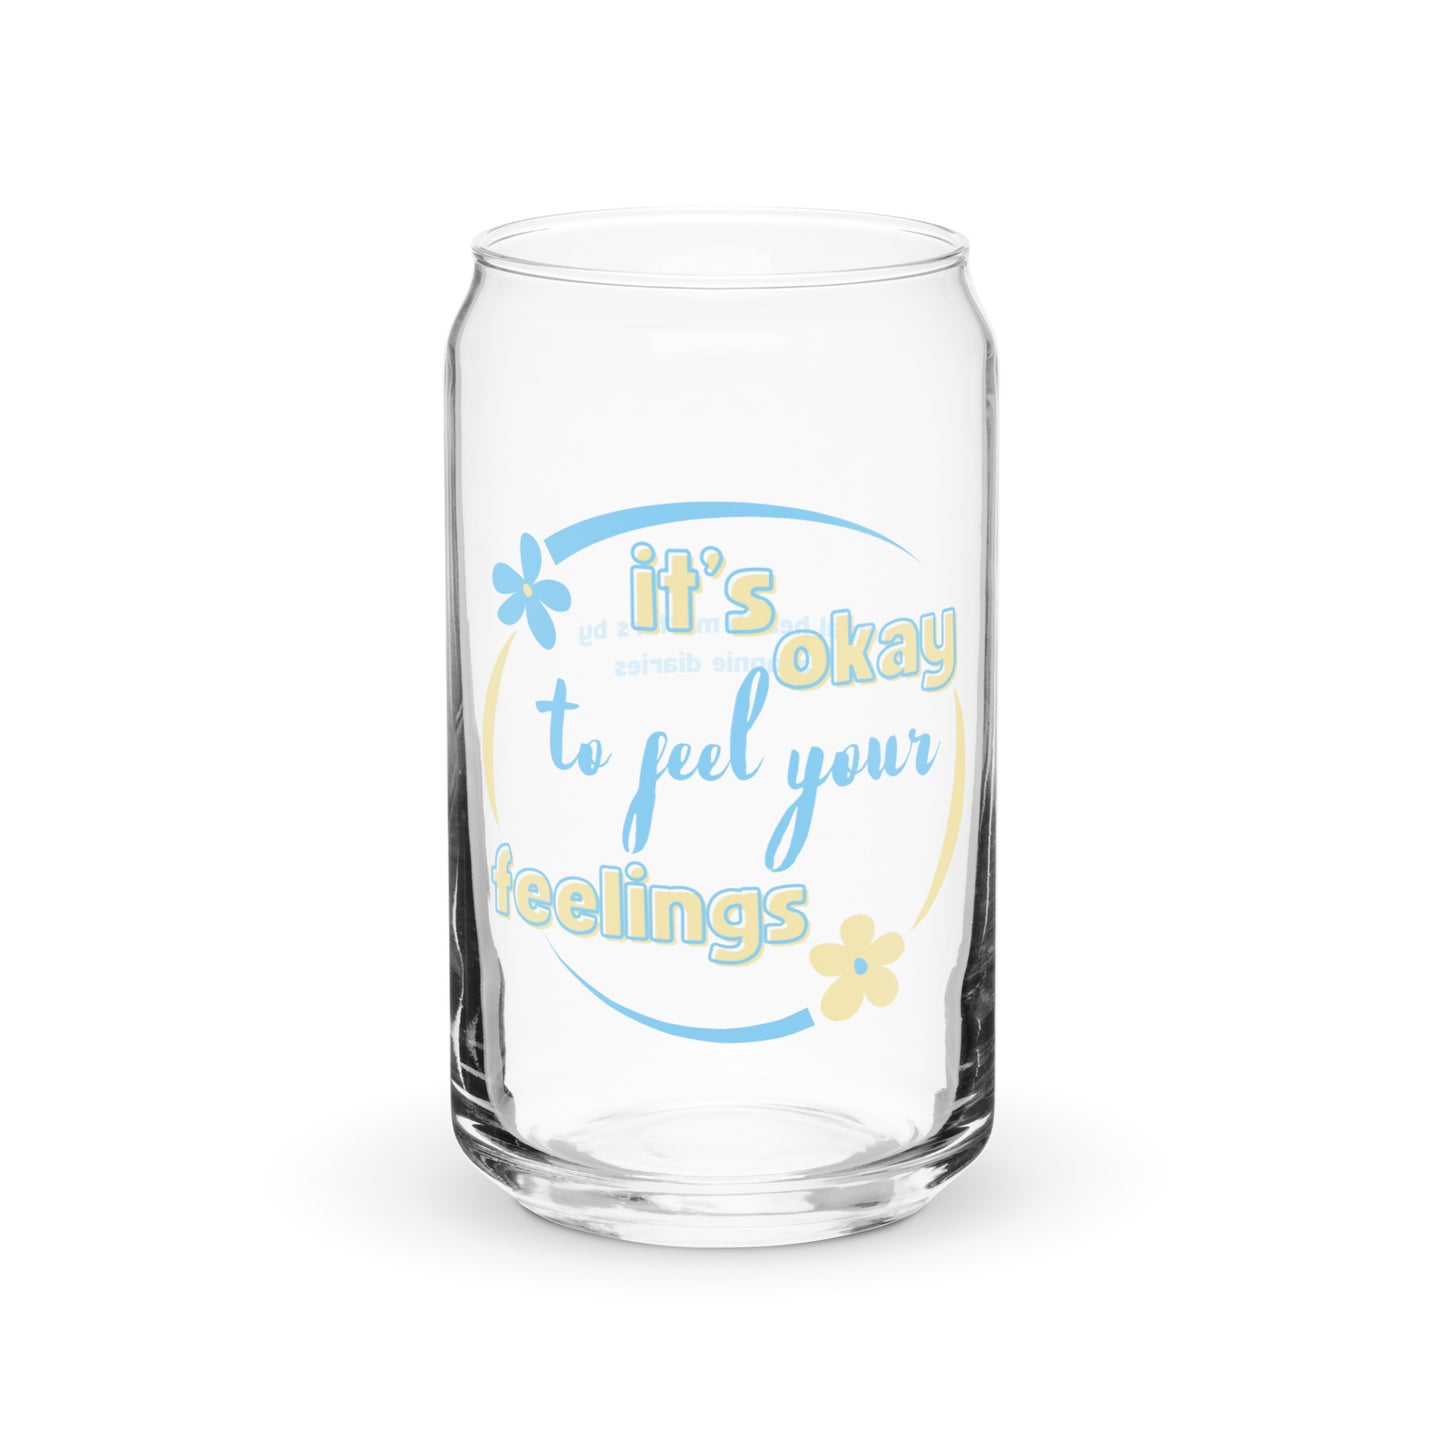 It's Okay to Feel Your Feelings Can-Shaped Glass -  Mental Health Matters by The Banannie Diaries - Volume: 16 oz. (473 ml), Glassware, Houseware